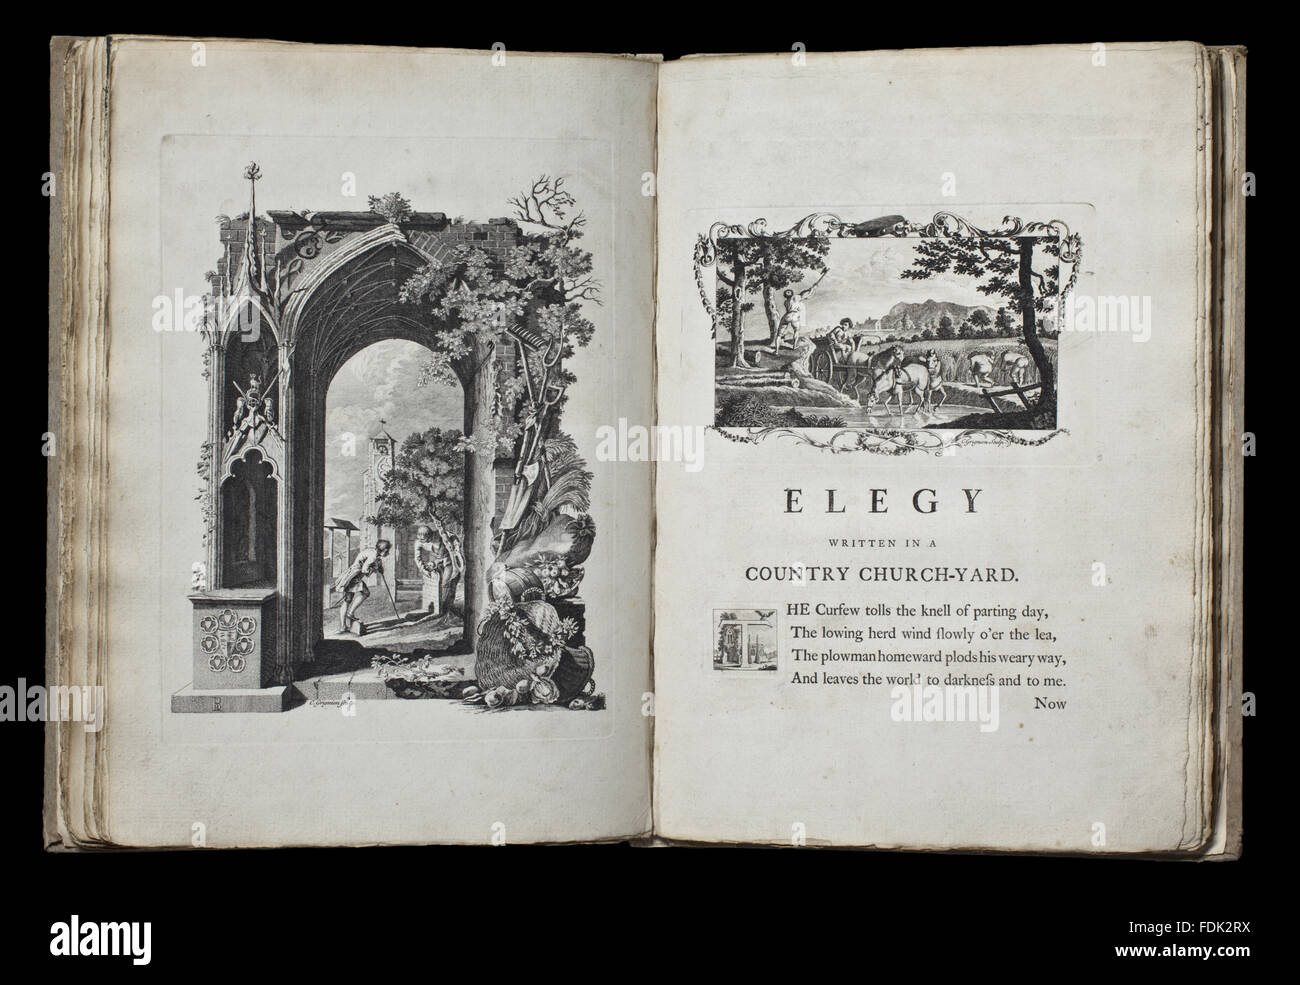 Designs by Mr R. Bentley for Six Poems by Mr T. Gray (London, 1766), Gray's elegy opening, part of the library collection at Anglesey Abbey, Cambridgeshire. 12.J.23 Stock Photo